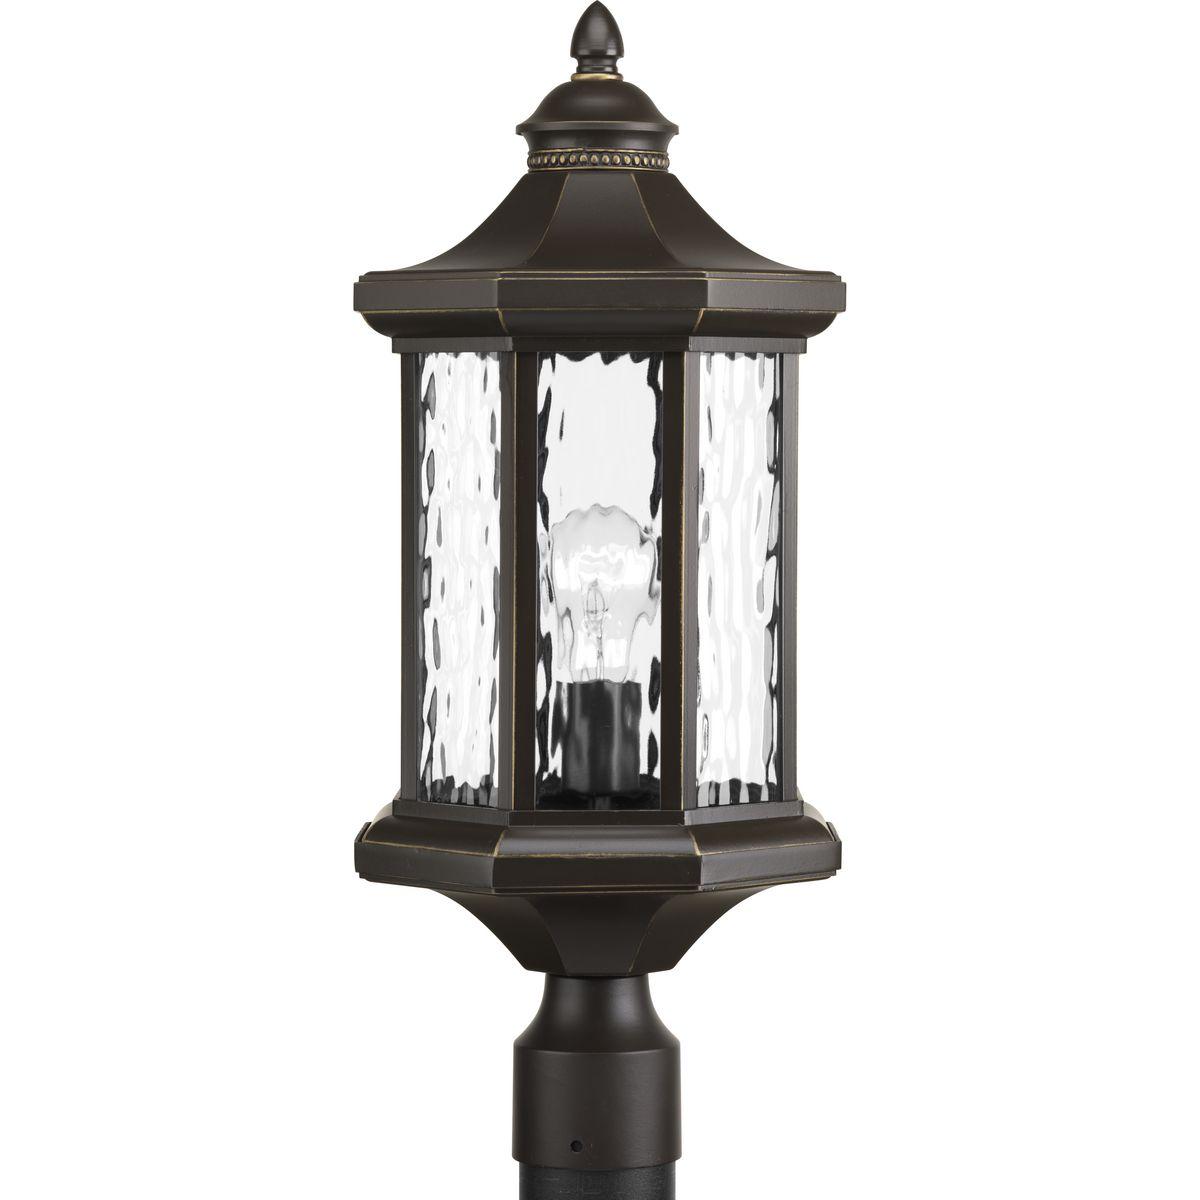 Hubbell P6429-20 The one-light post lantern in the Edition collection features distinctive octagonal shape for classic styling. Clear water glass elements are accented by a Antique Bronze finish. Die-cast aluminum construction with a powder coat finish makes this a durabl